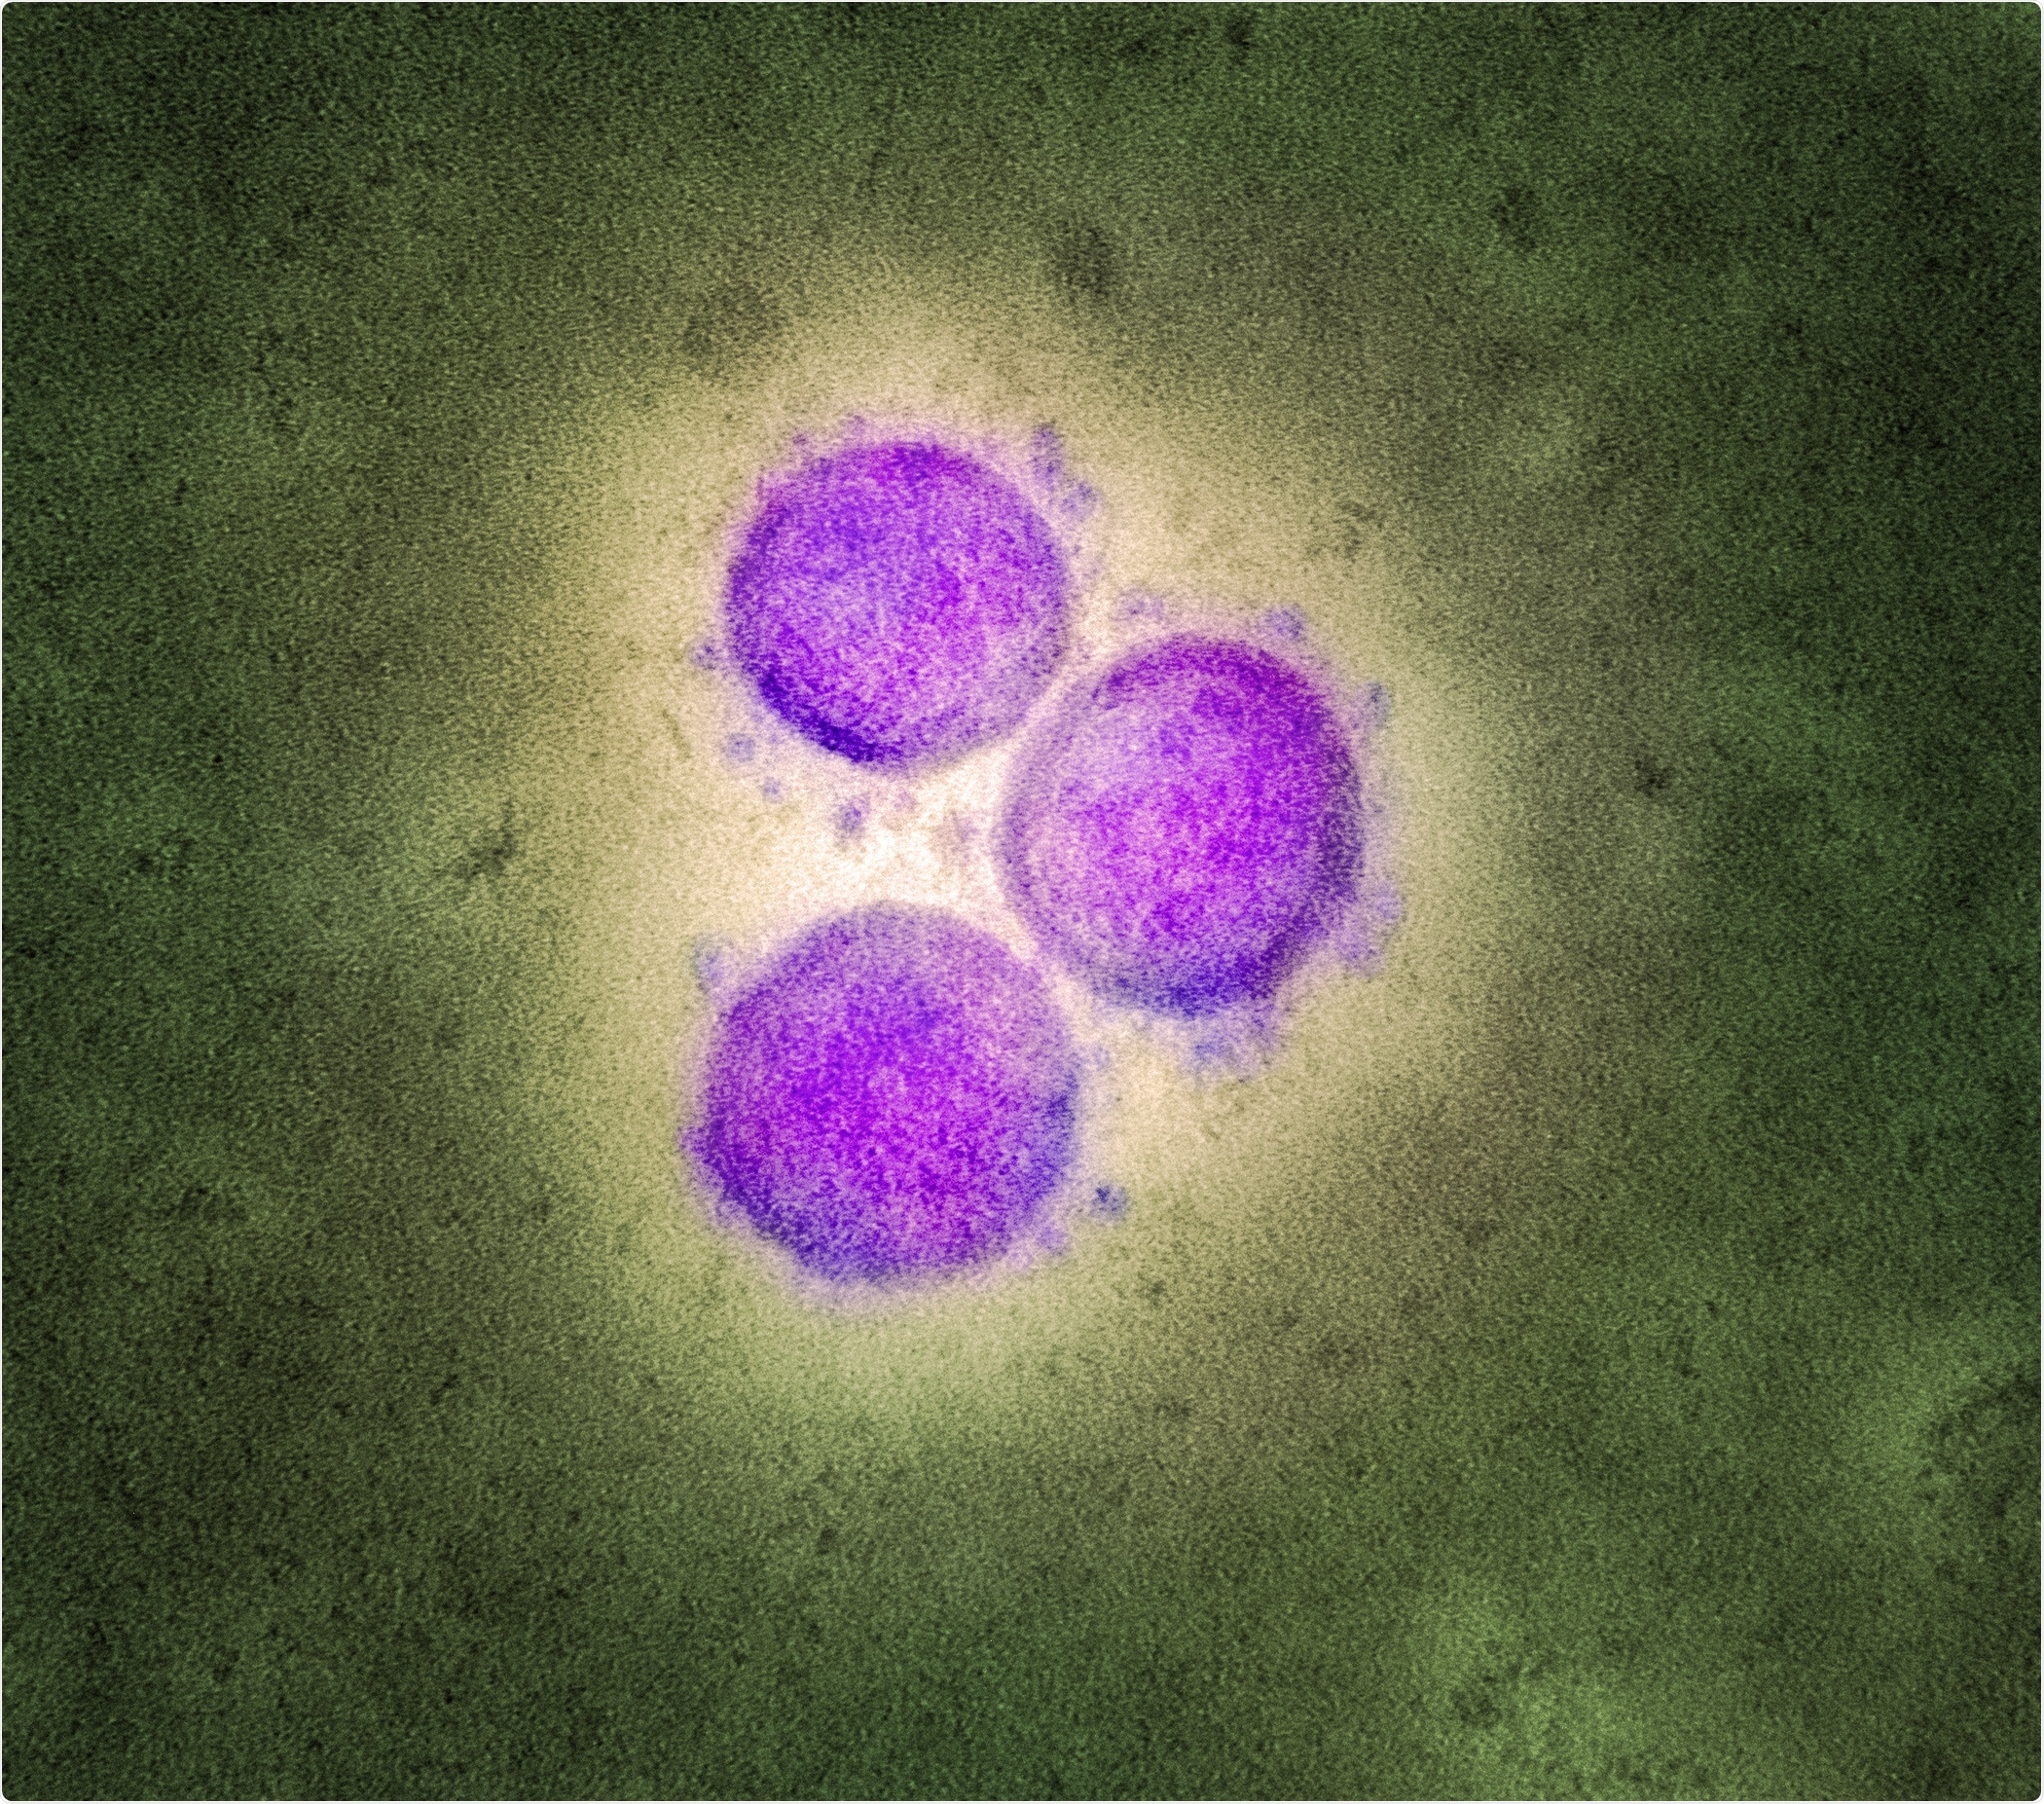 Study: Rapid determination of the wide dynamic range of SARS-CoV-2 Spike T cell responses in whole blood of vaccinated and naturally infected. Image Credit: NIAID